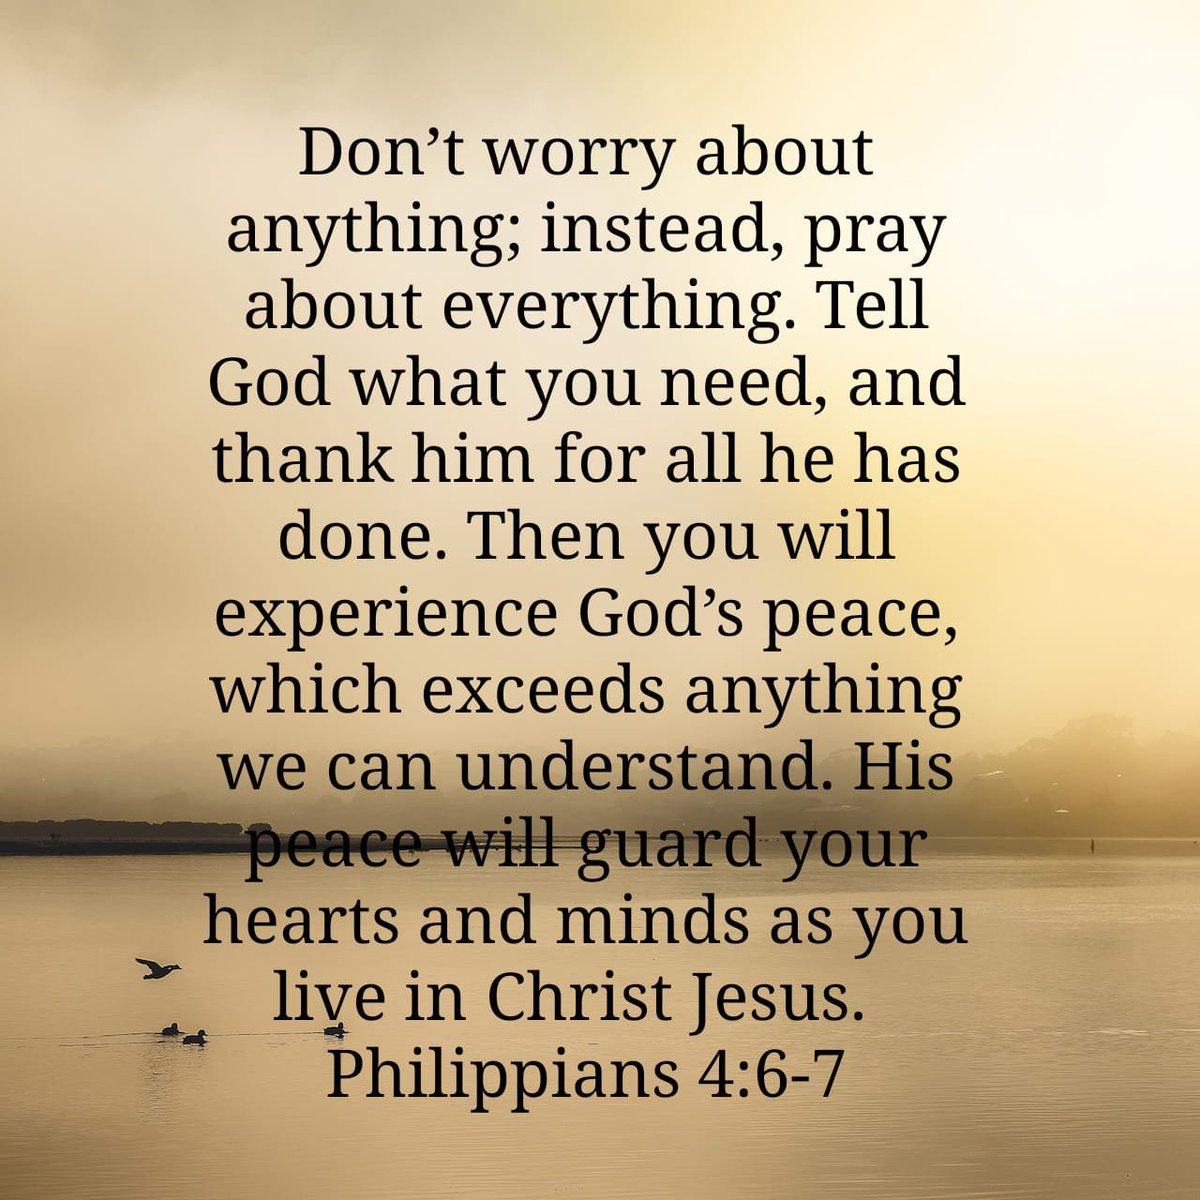 Let's be praying that everything will be back to normal soon & that all of these 'wicked stuff' will be over sooner...Let's trust God in everything coz He is sovereign & in control of everything. #MayWard  #MaymayEntrata  #EdwardBarber